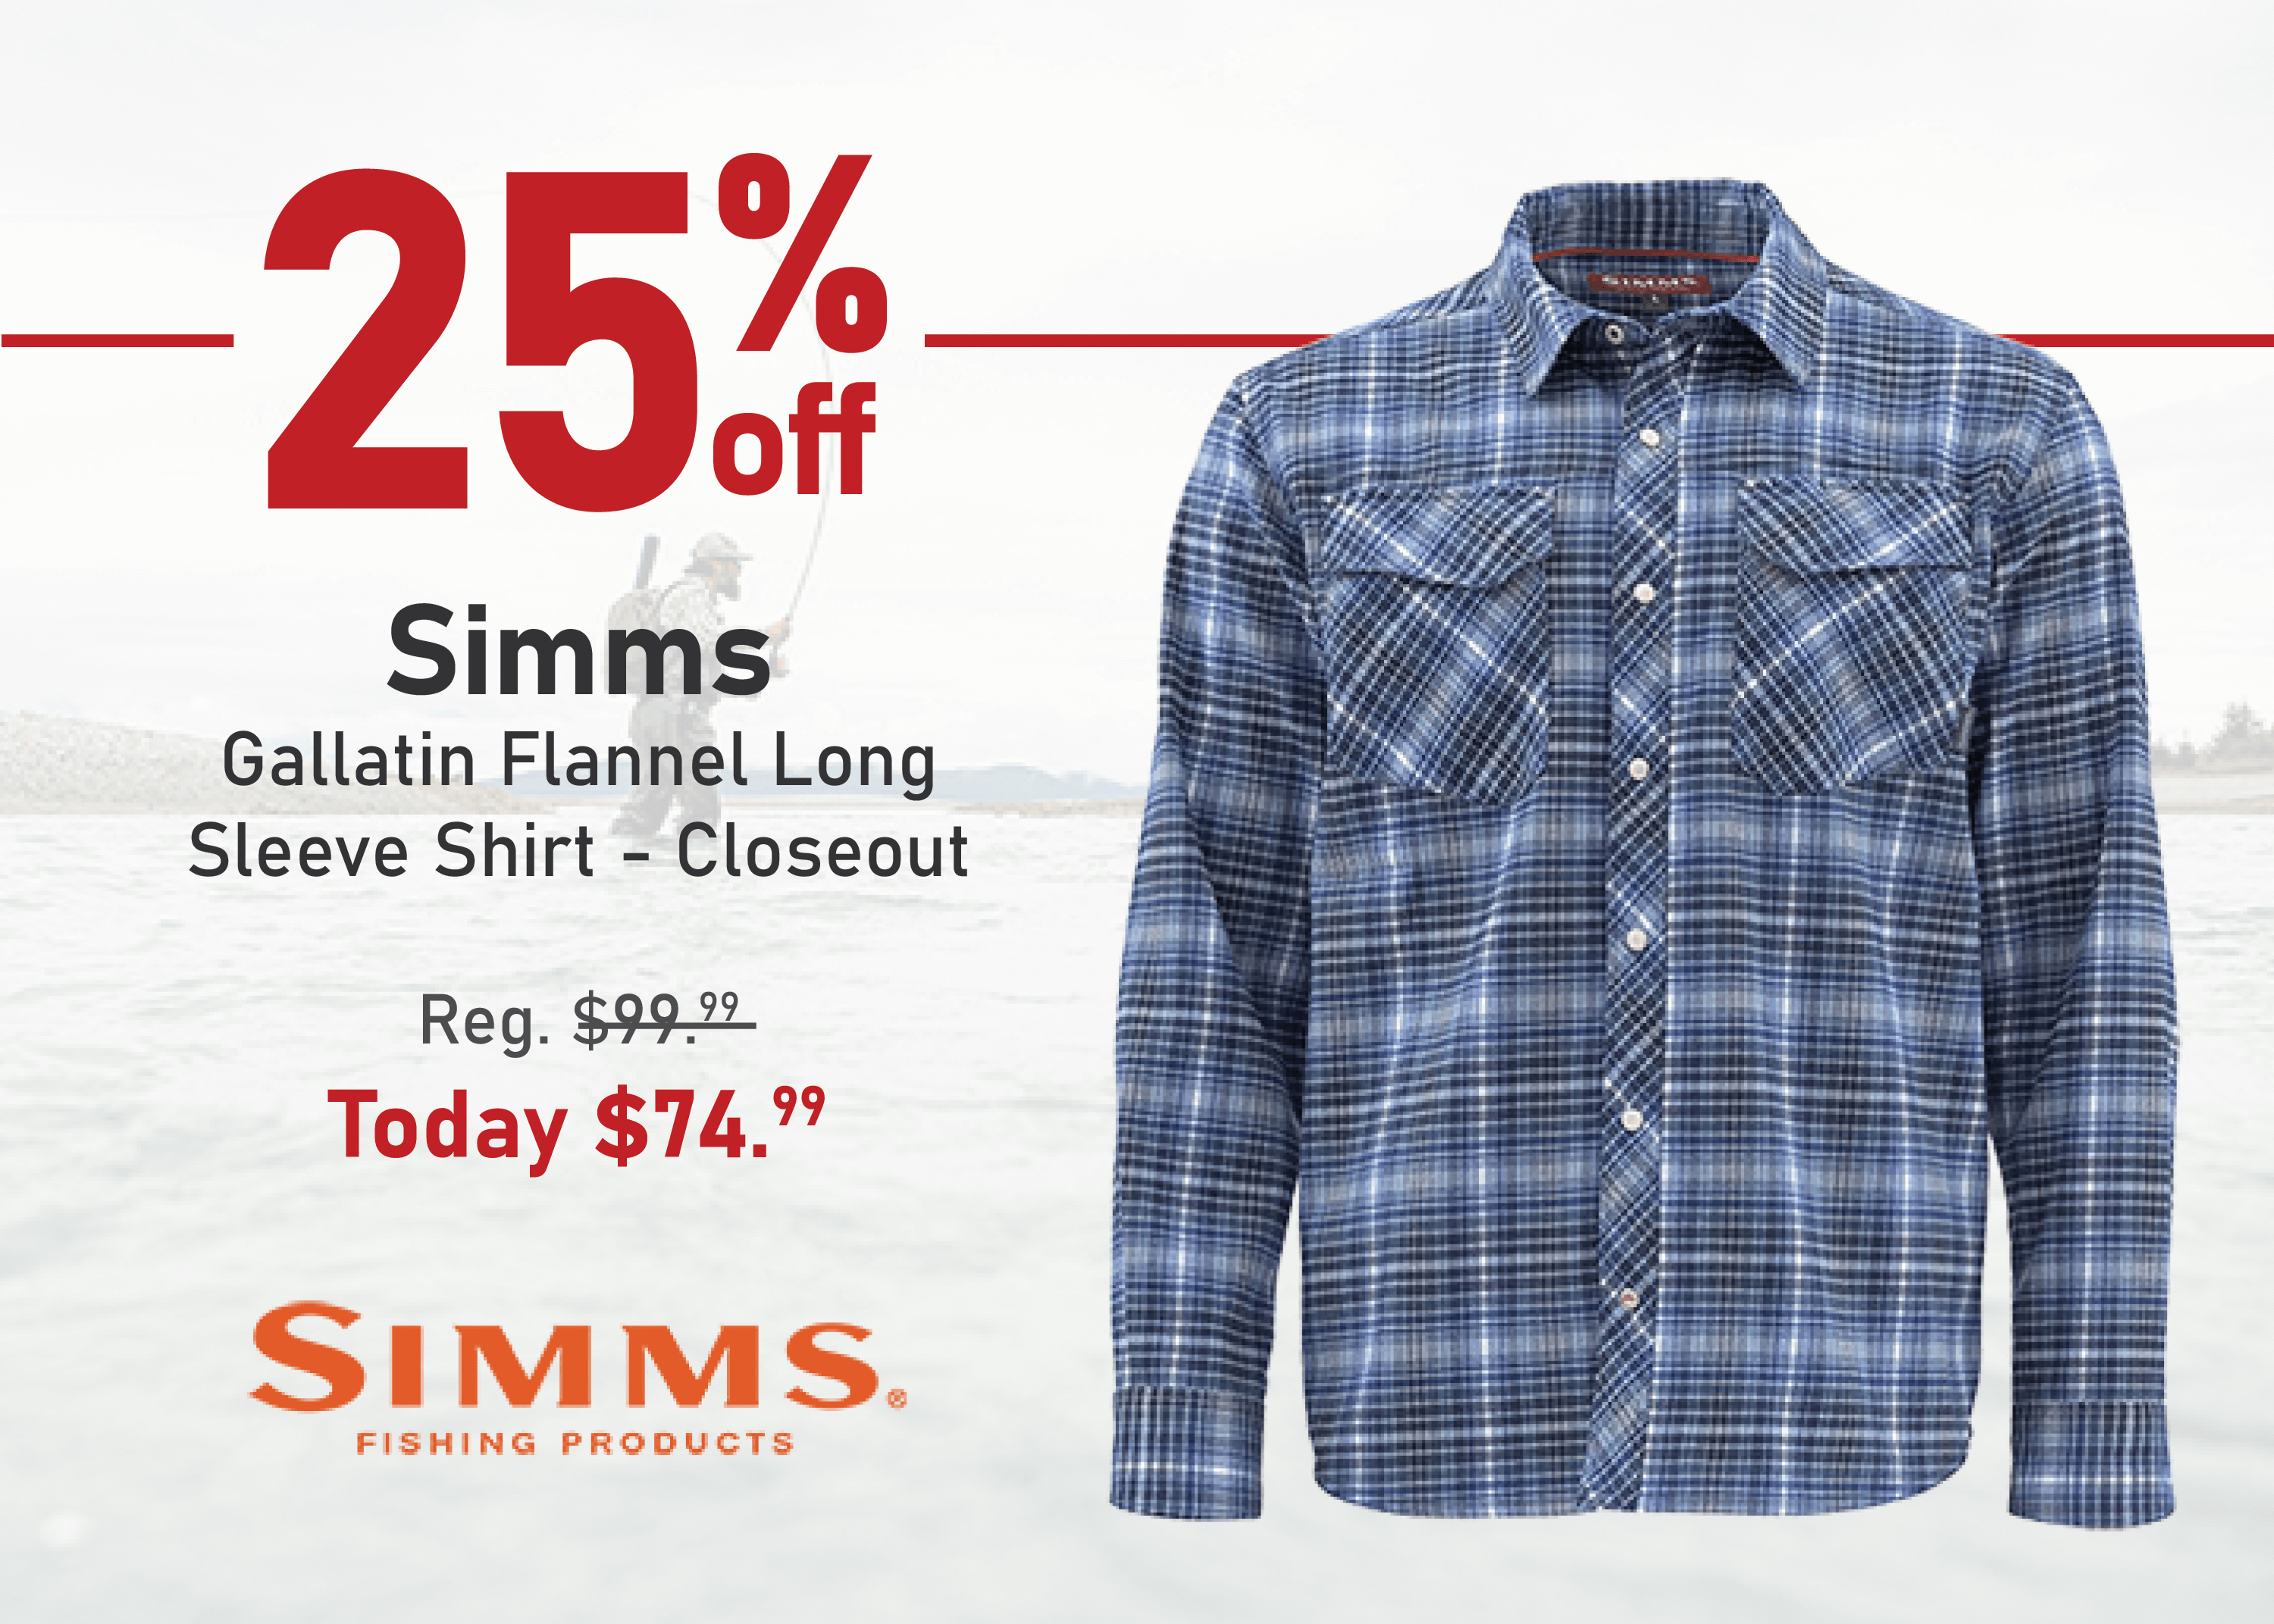 Save 25% on the Simms Gallatin Flannel Long Sleeve Shirt - Closeout